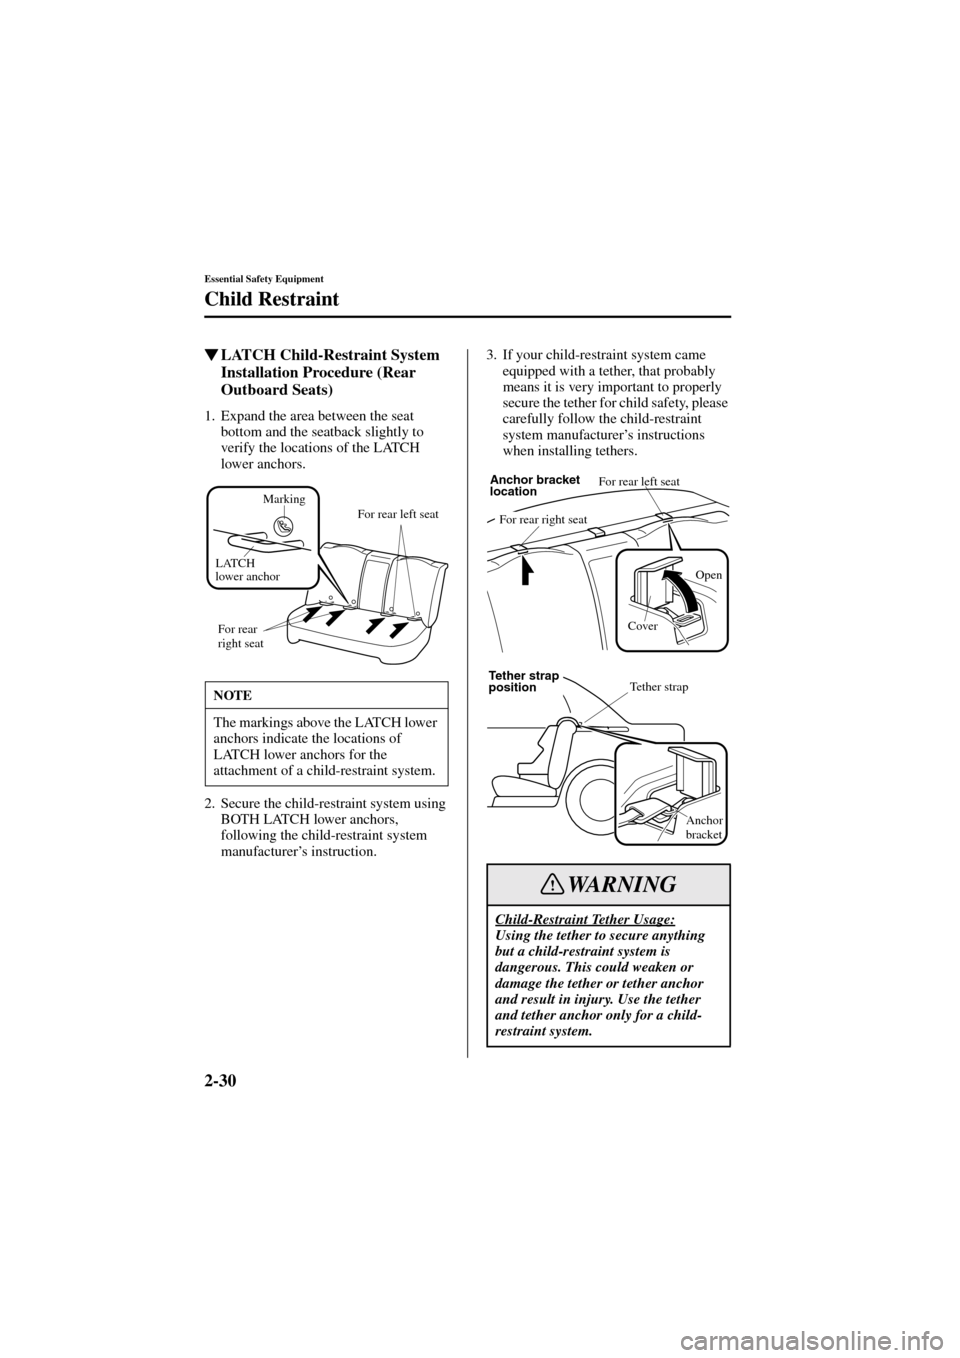 MAZDA MODEL 6 2004   (in English) Service Manual 2-30
Essential Safety Equipment
Child Restraint
Form No. 8R29-EA-02I
LATCH Child-Restraint System 
Installation Procedure (Rear 
Outboard Seats)
1. Expand the area between the seat 
bottom and the se